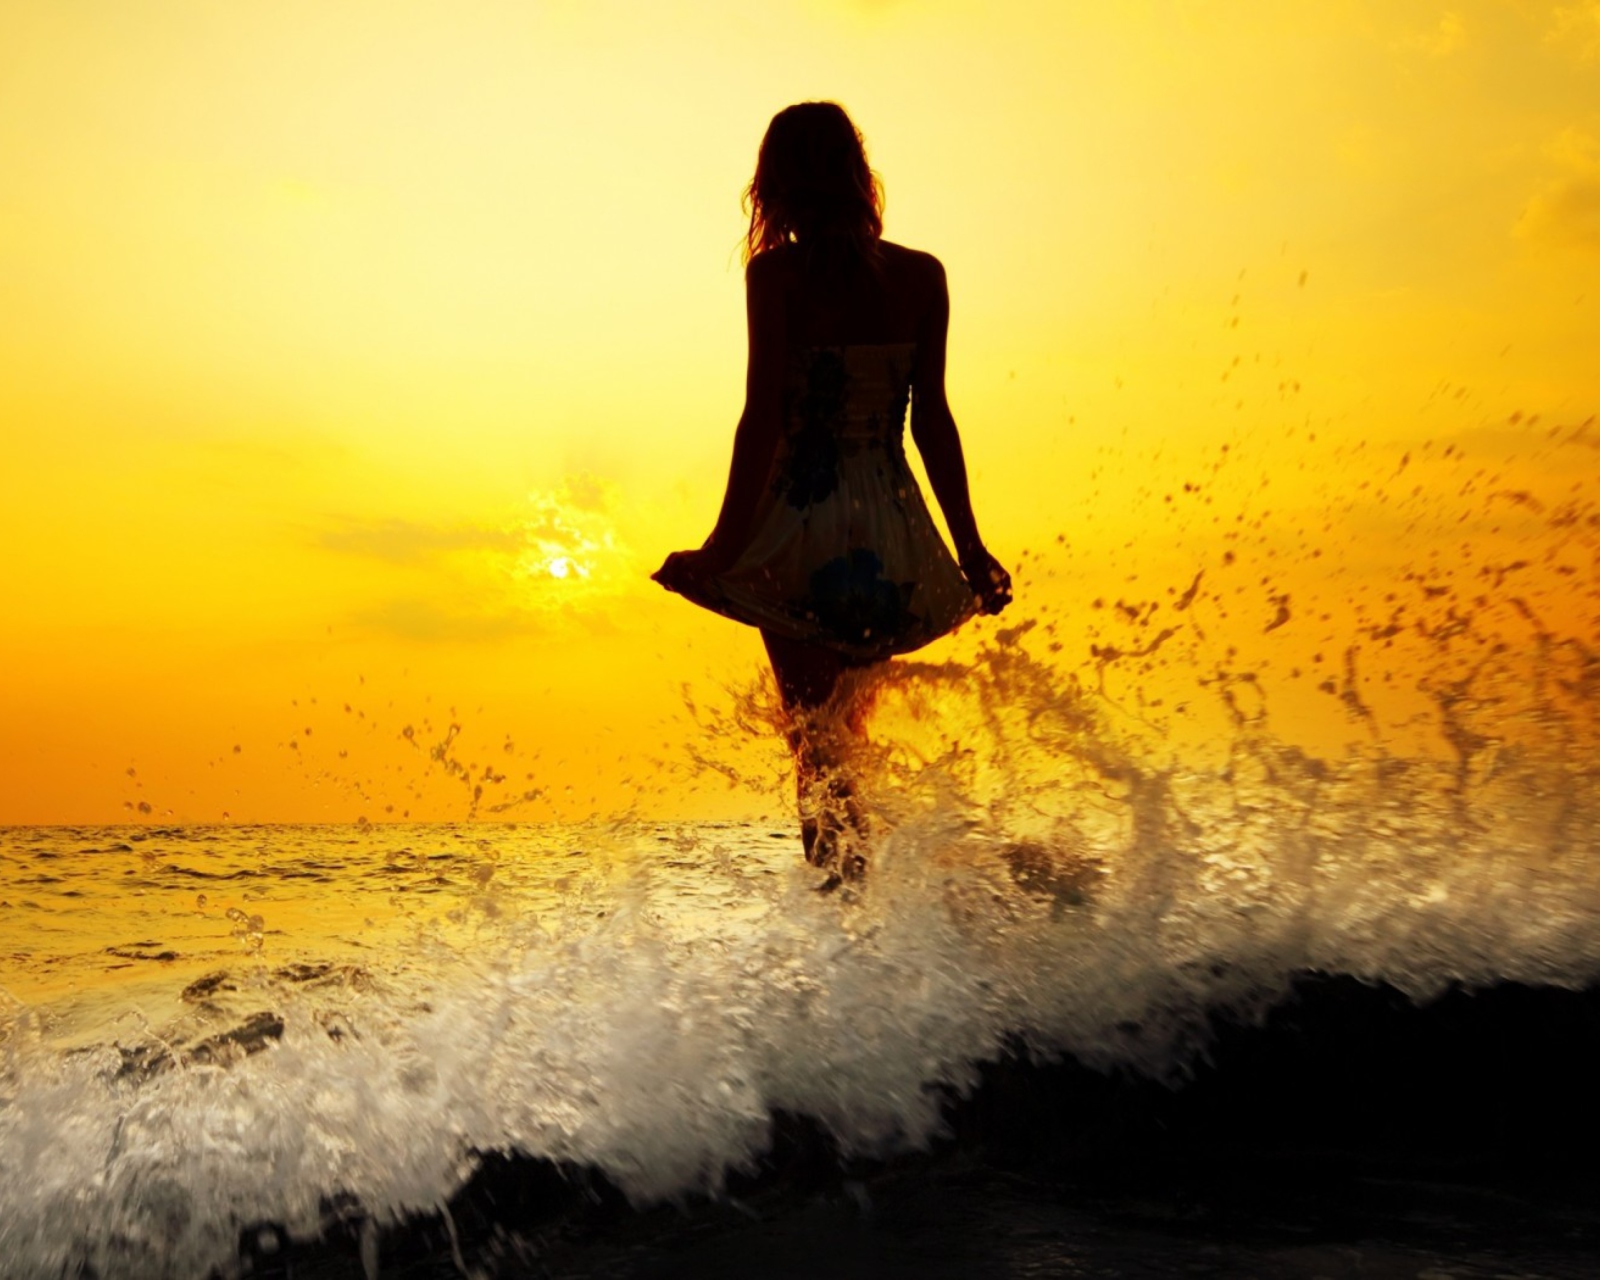 Girl Silhouette In Sea Waves At Sunset screenshot #1 1600x1280